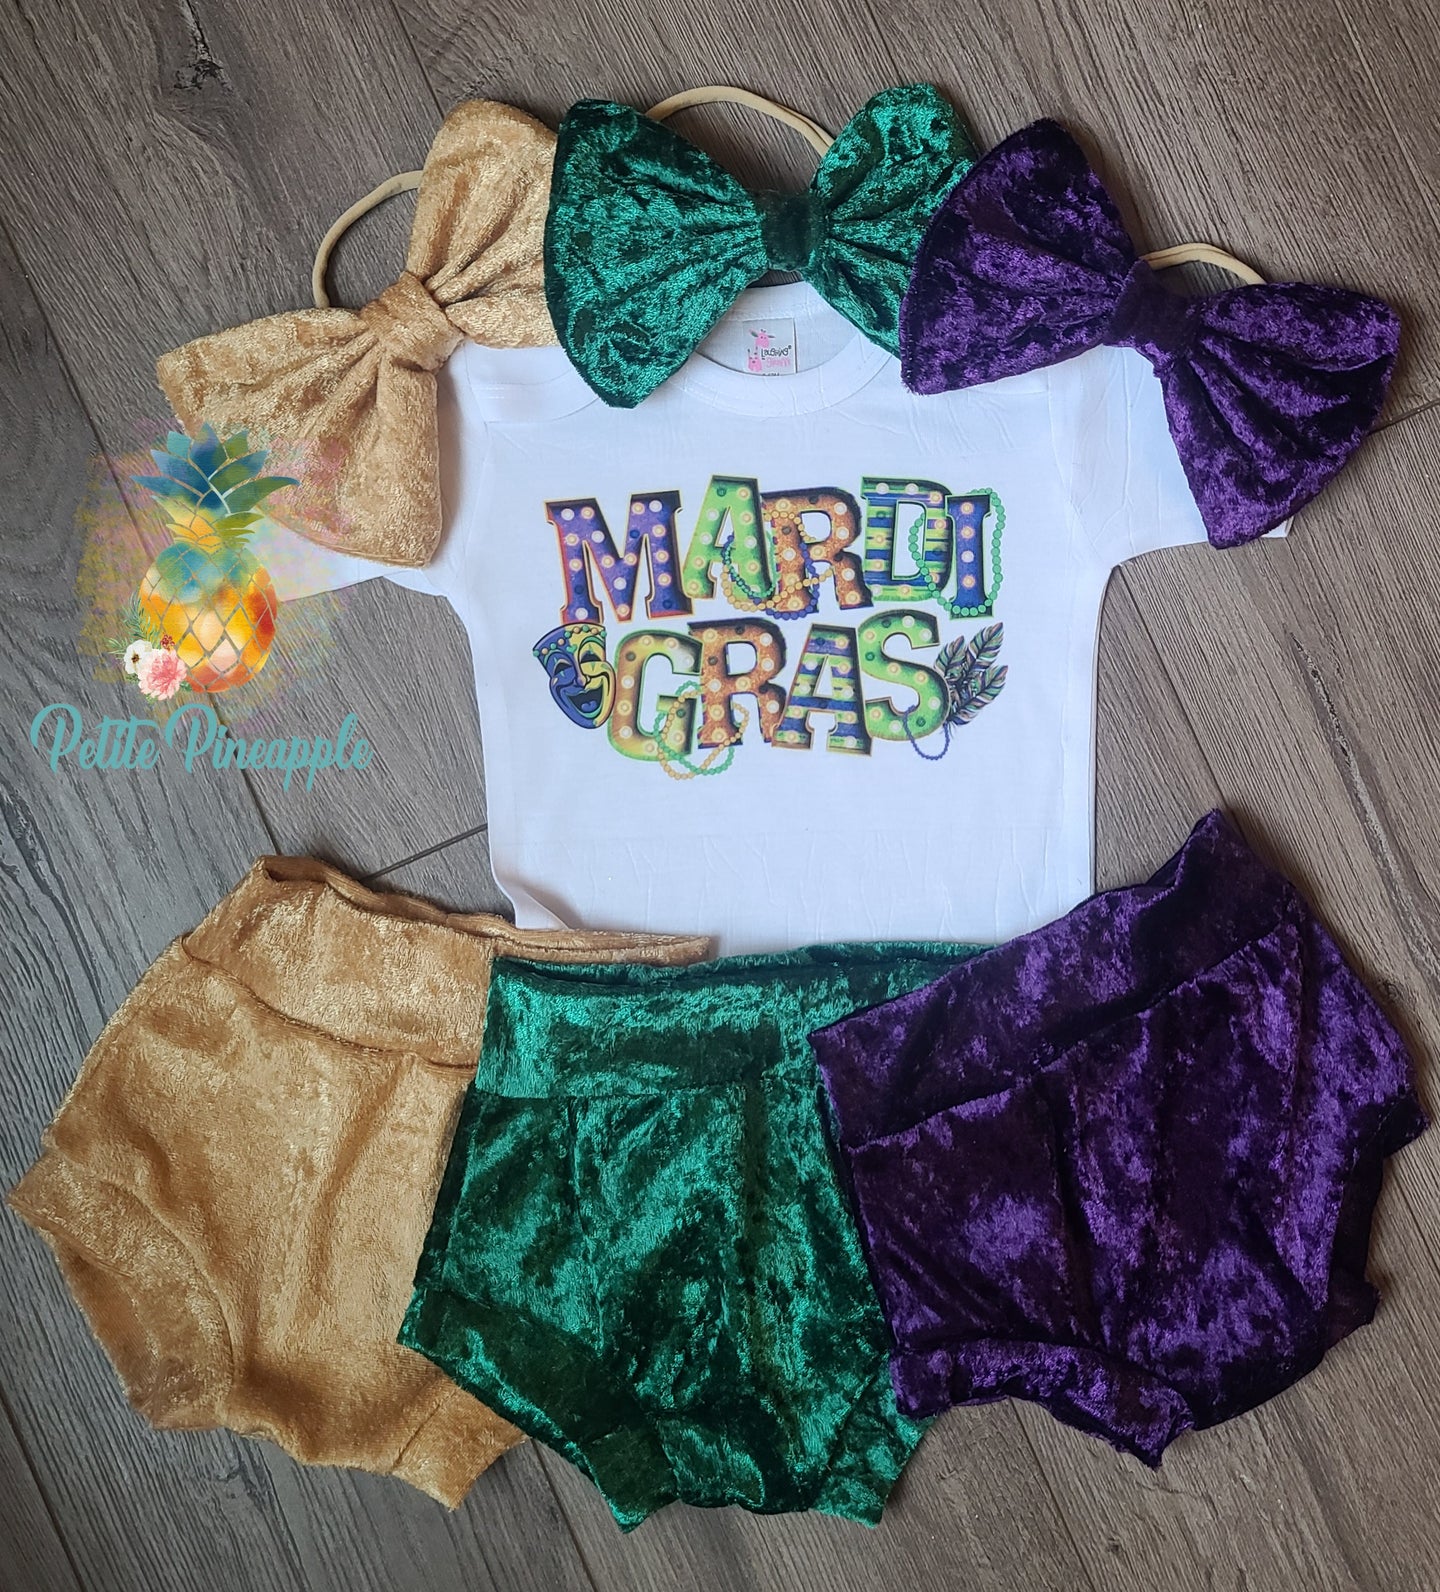 Mardi Gras outfit